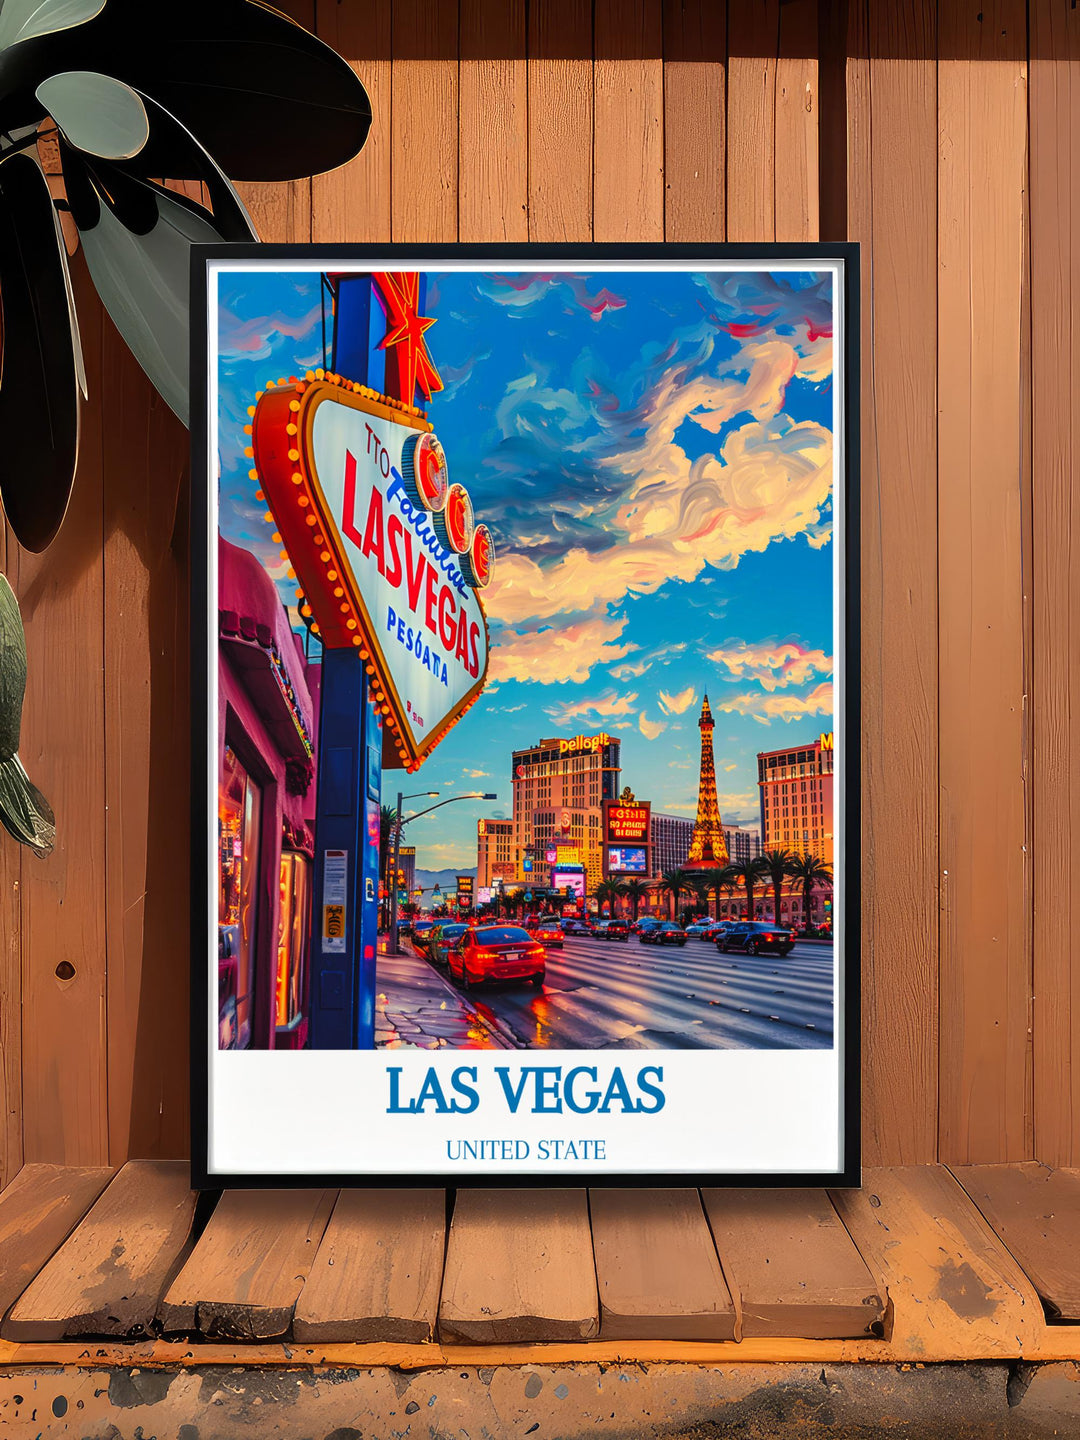 Las Vegas themed art print, ideal for gifting to fans of the city or those who celebrate its cultural impact.